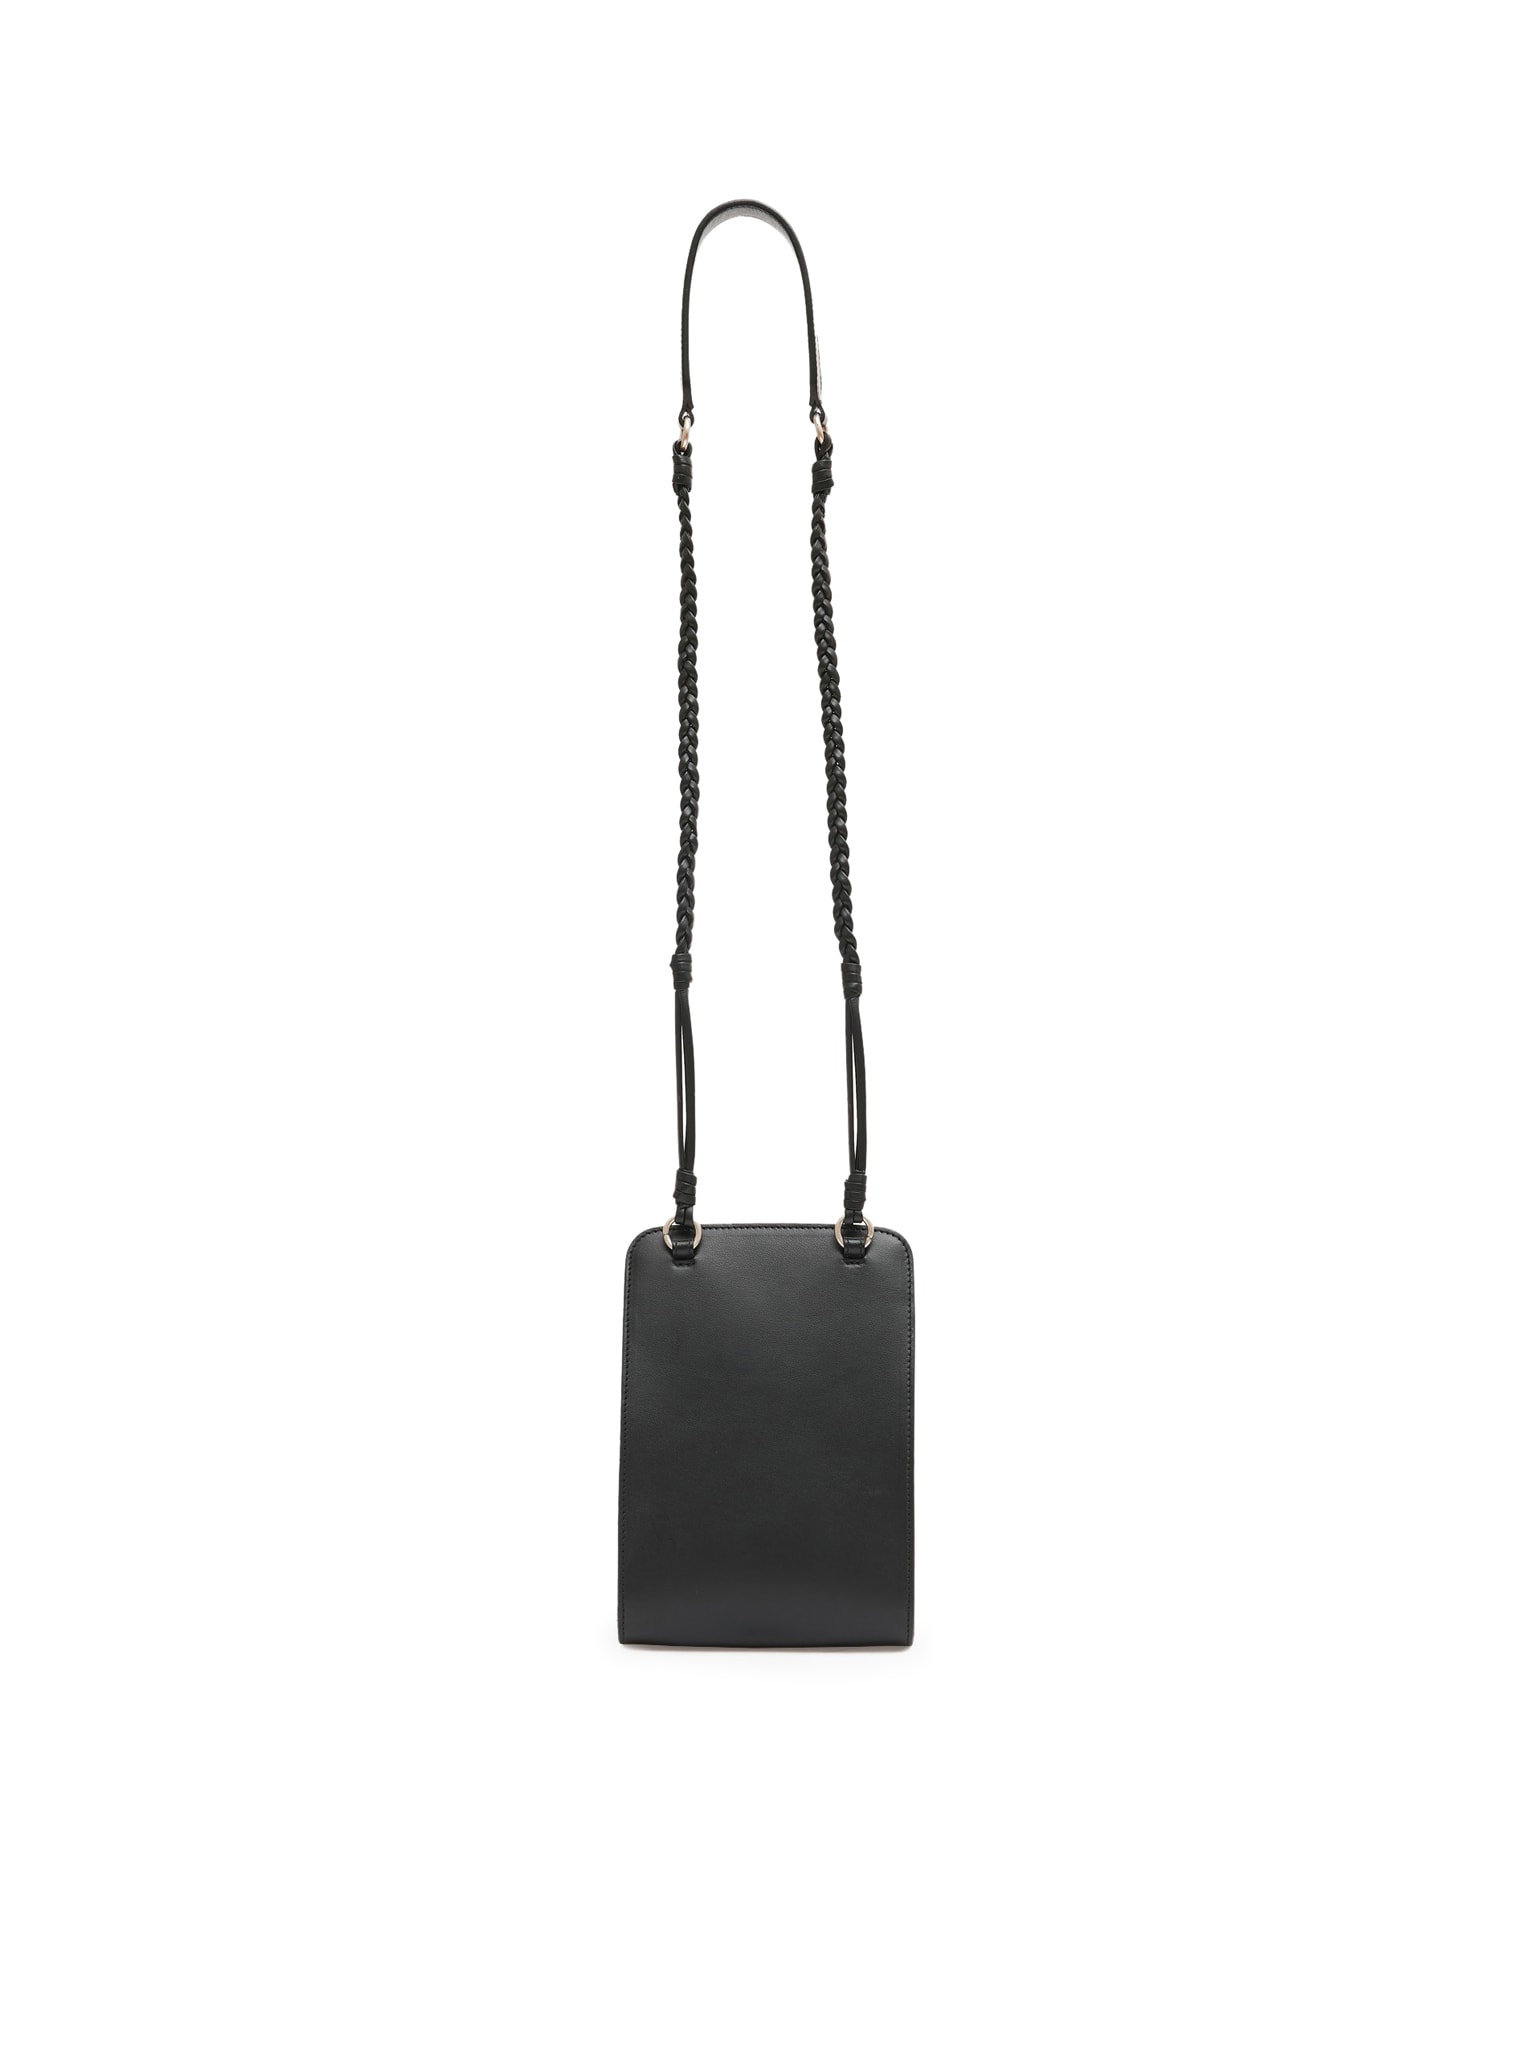 Shop Durazzi Milano Tile Bagcalfskin Leather With Branded D-ring In Black